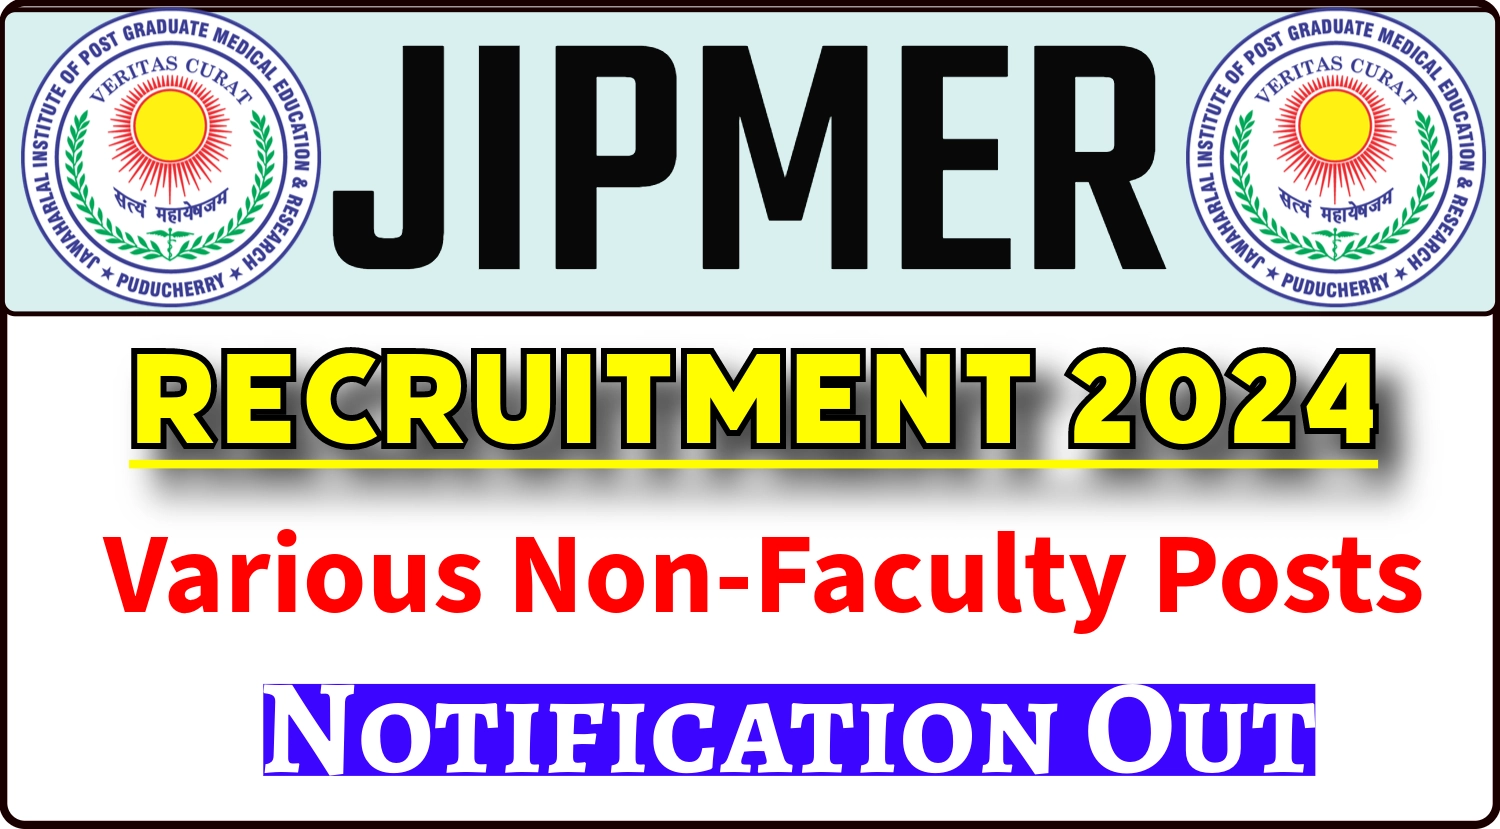 JIPMER recruitment 2018: Applications invited for the posts of Professor,  apply now at jipmer.puducherry.gov.in - The Statesman